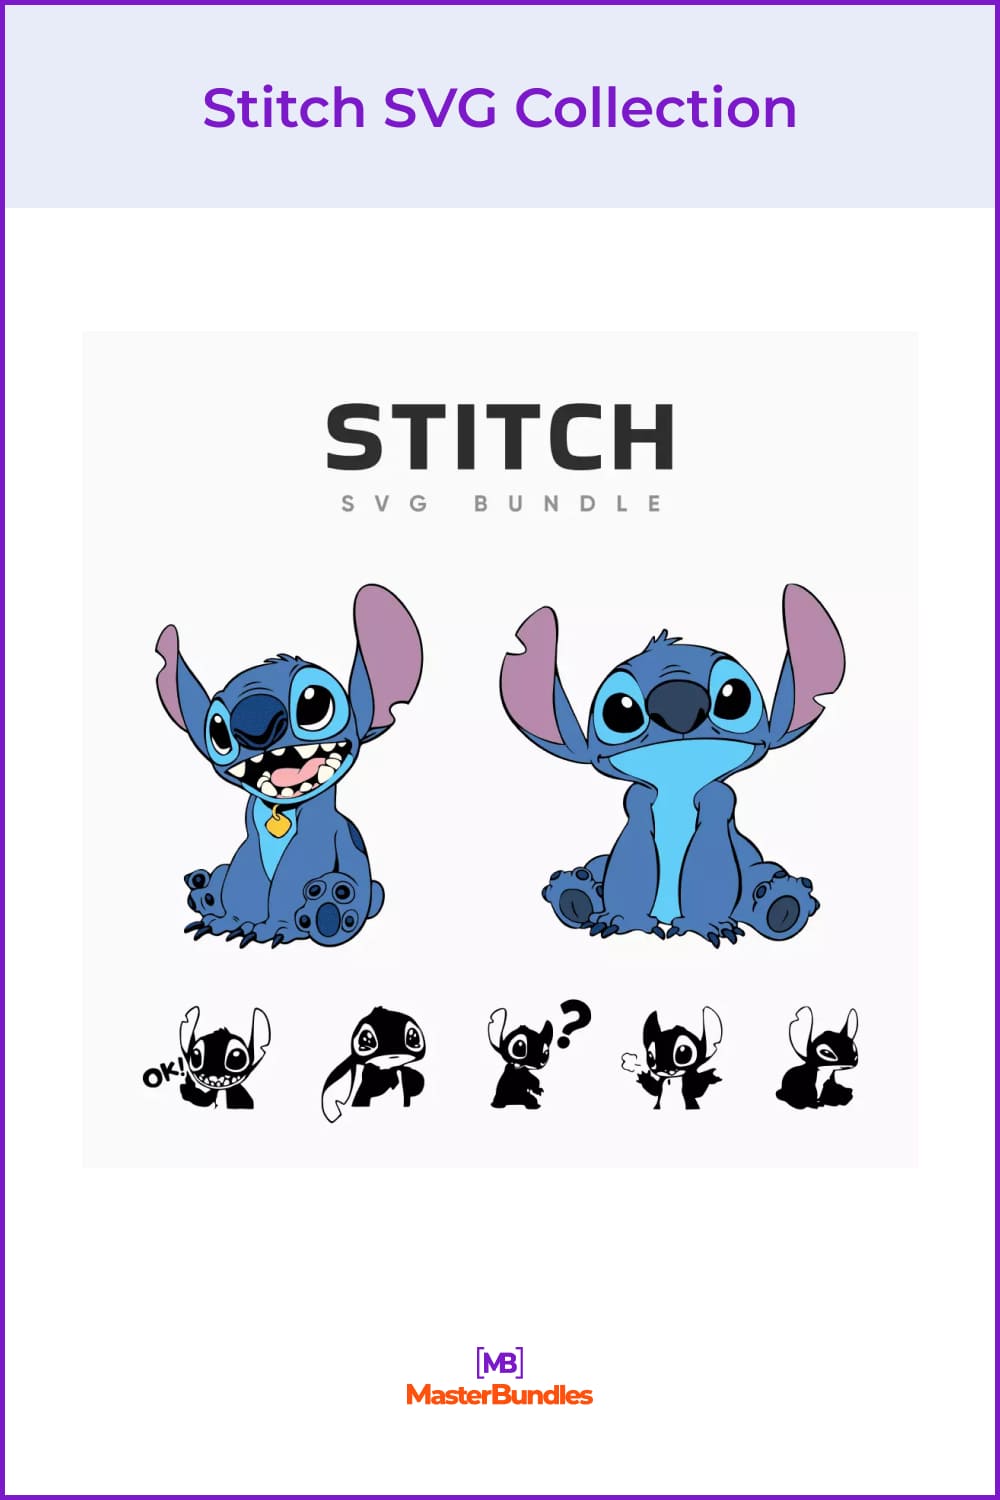 Collection of Stitch's images in color and BW.